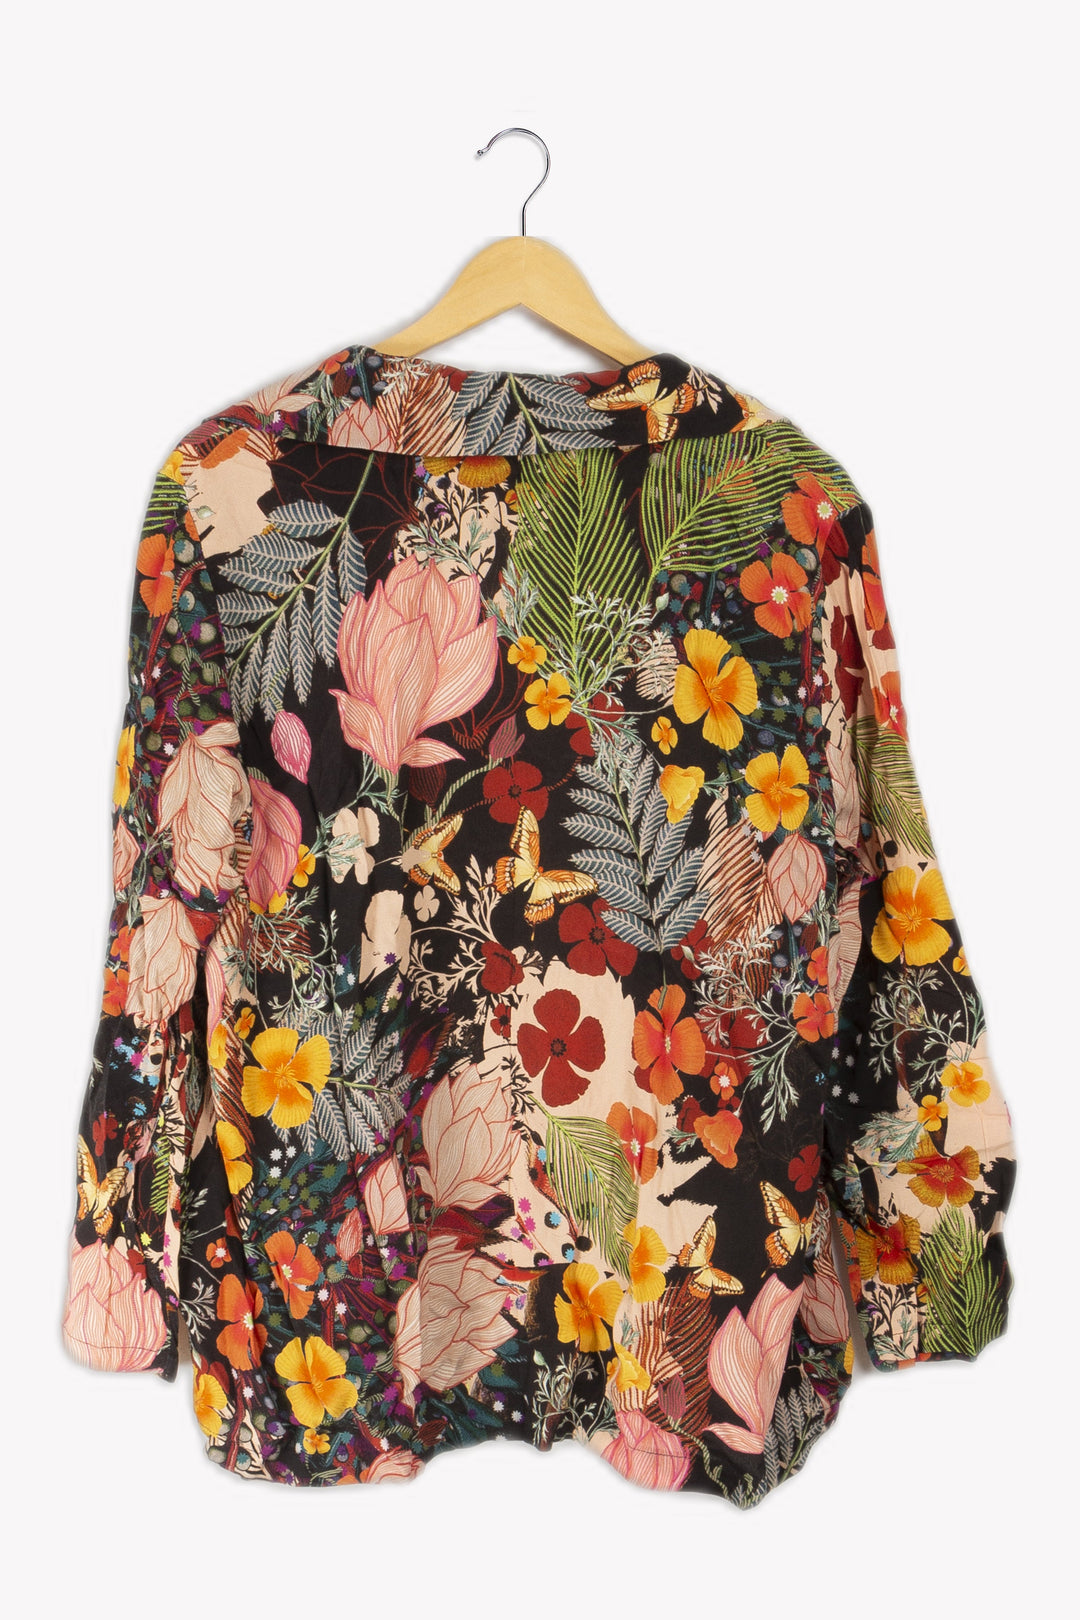 Light jacket with multicolored floral patterns - 44